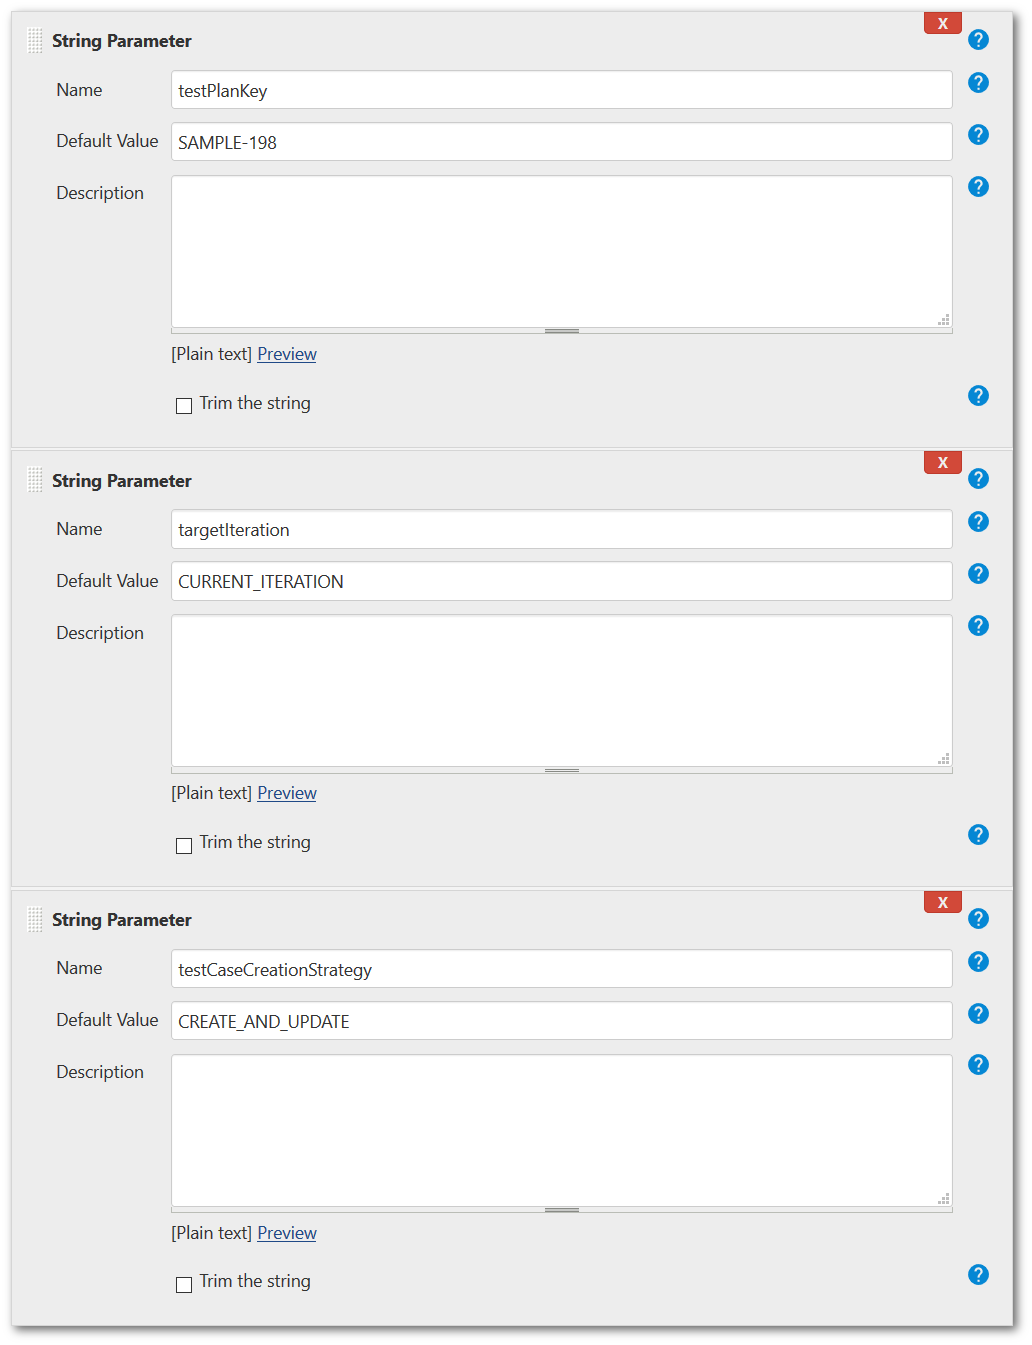 Example of completed parameters in Jenkins for run automated tests to TestFLO - Test Managemenet in Jira